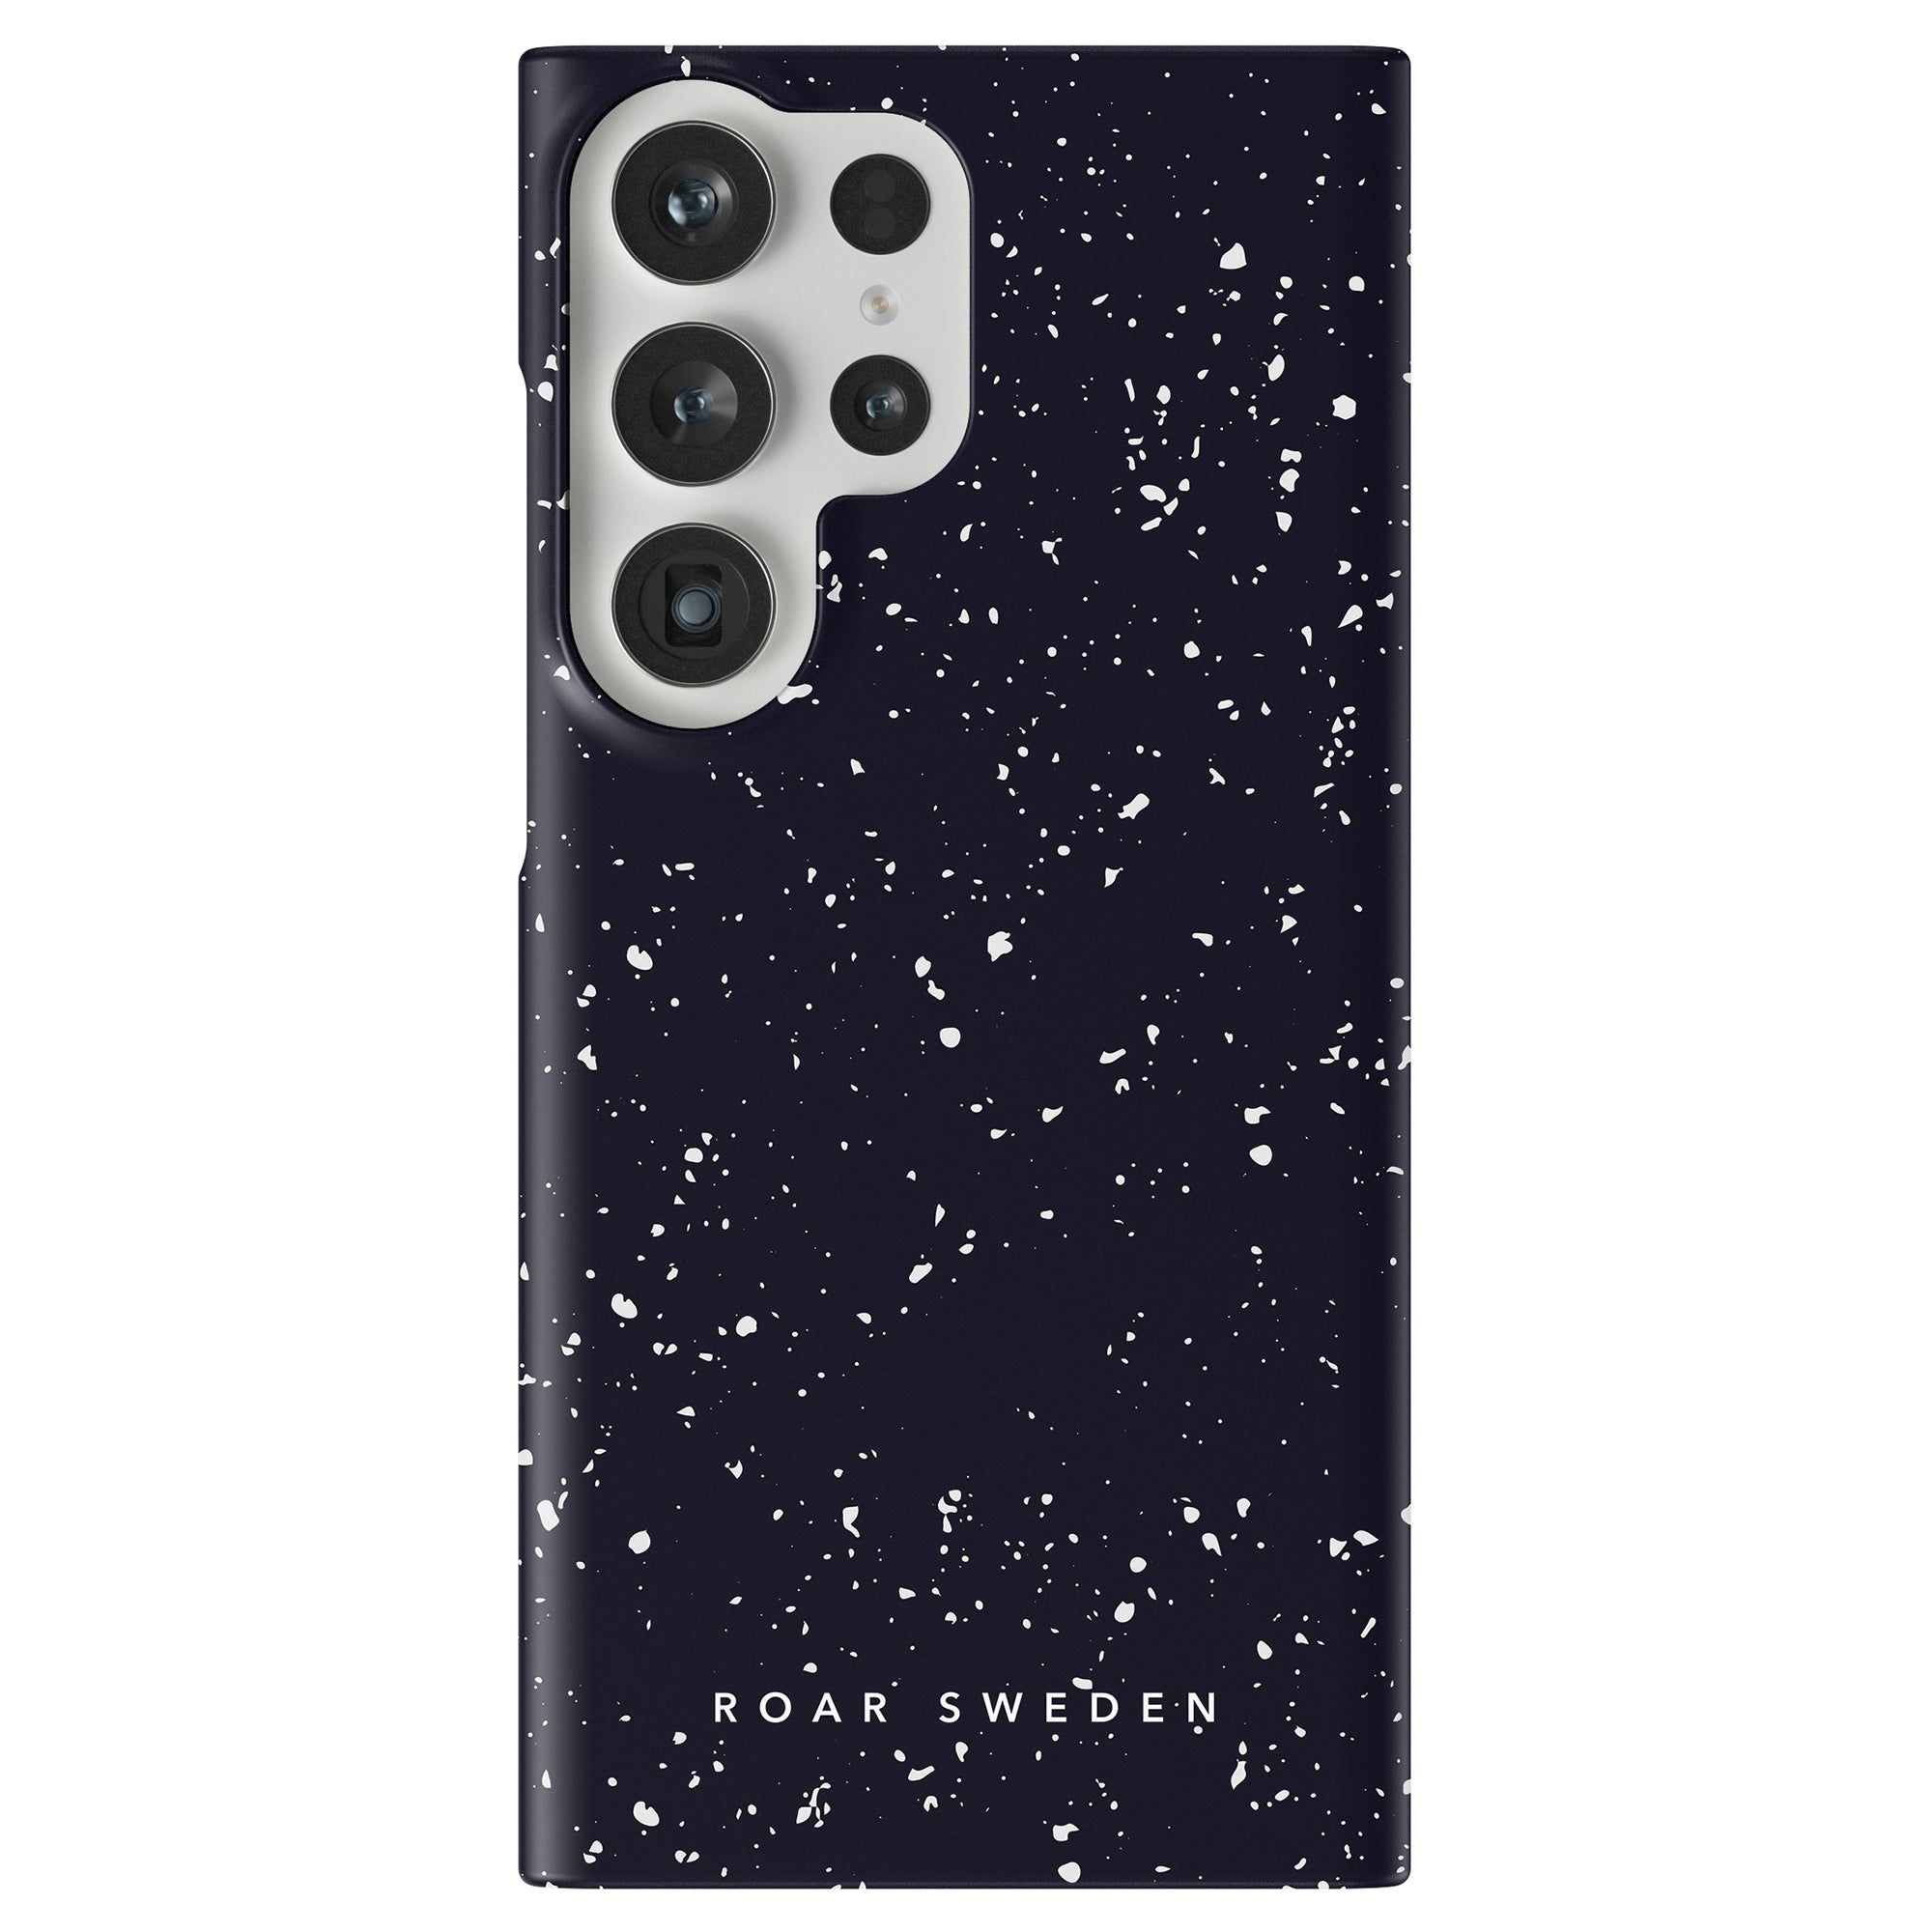 Without specific keywords to modify the description, it's difficult to provide an accurate revision. However, if I were to improvise a modification based on the details available in your request, it could look something like Night Stars - Slim case.